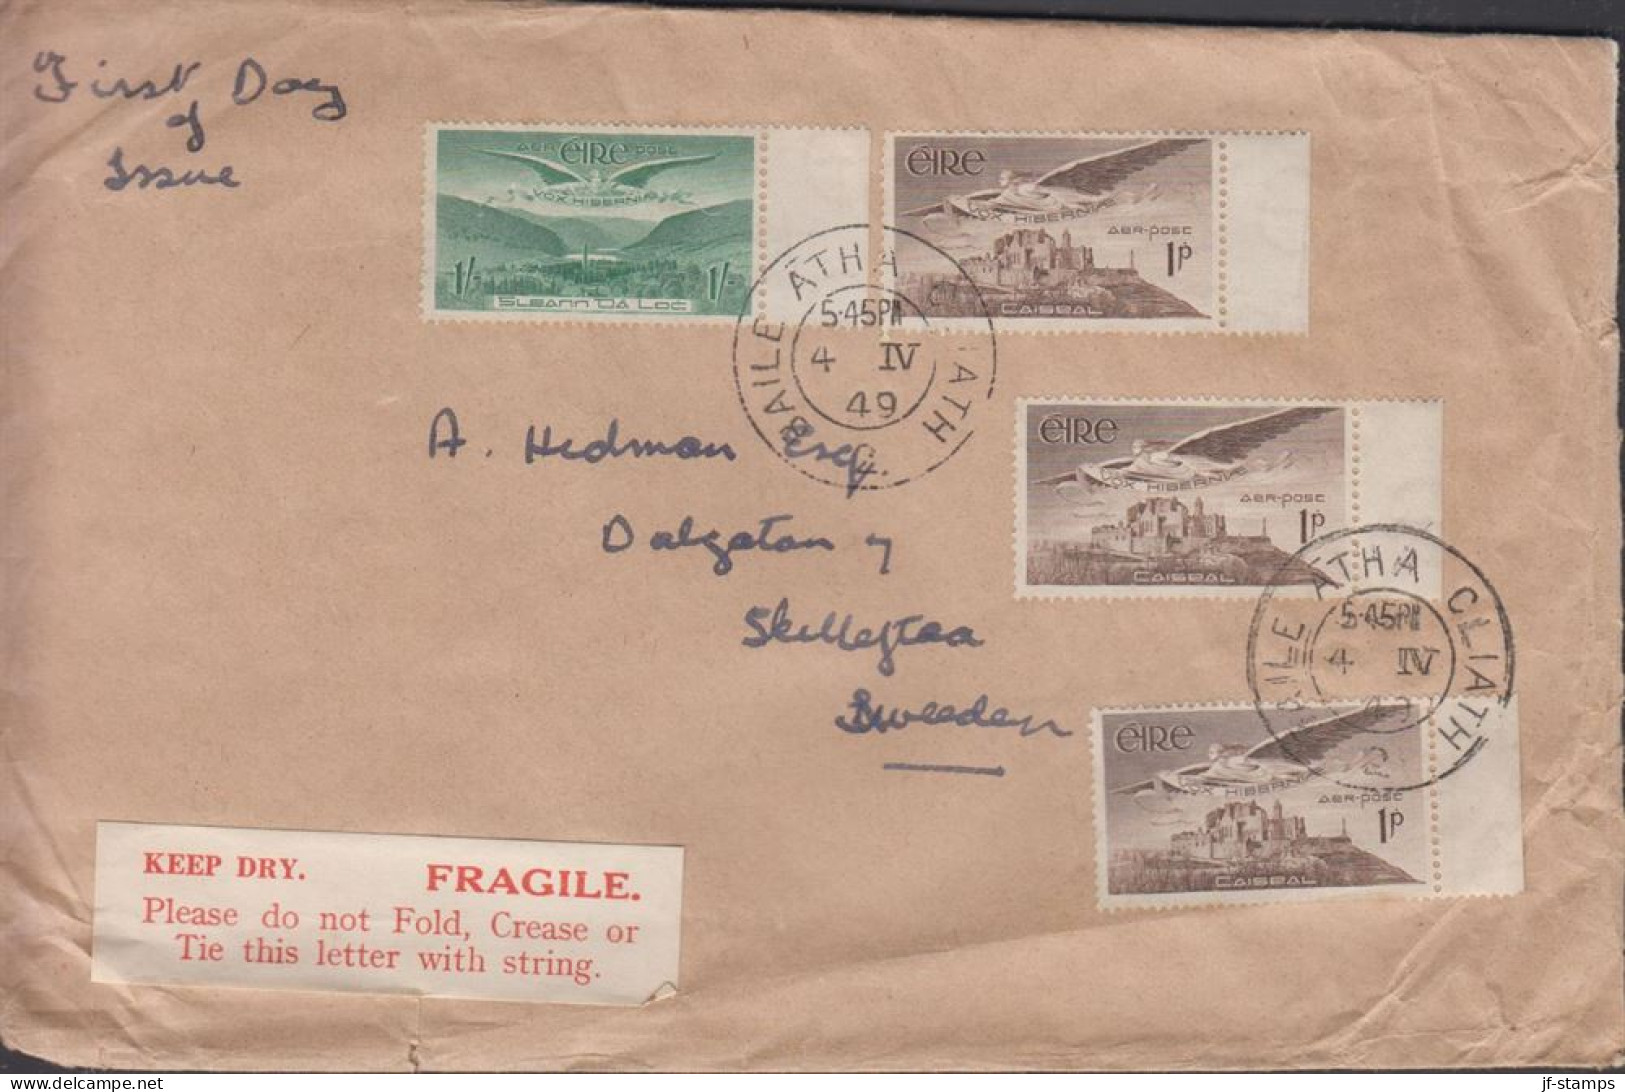 1949. EIRE. 3 Ex 1 P + 1 Sh AIR MAIL On Cover To Sweden Cancelled BAILE ATHA CLIATH 4 IV 49.... (Michel 102+) - JF432467 - Covers & Documents